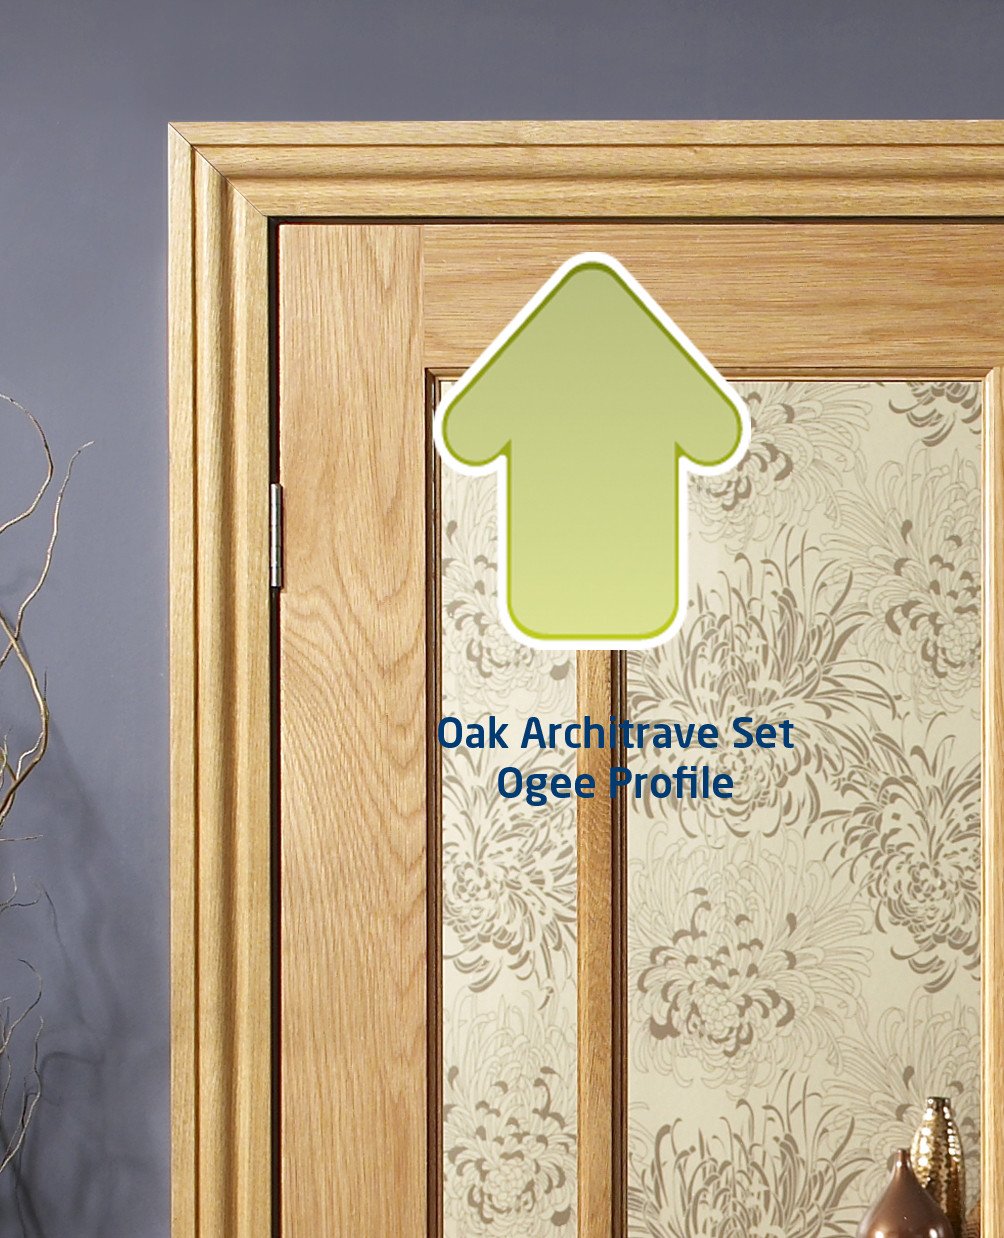 XL Joinery Oak Door Architrave Set in a Classic 'Ogee' profile - Fits both sides of the Door